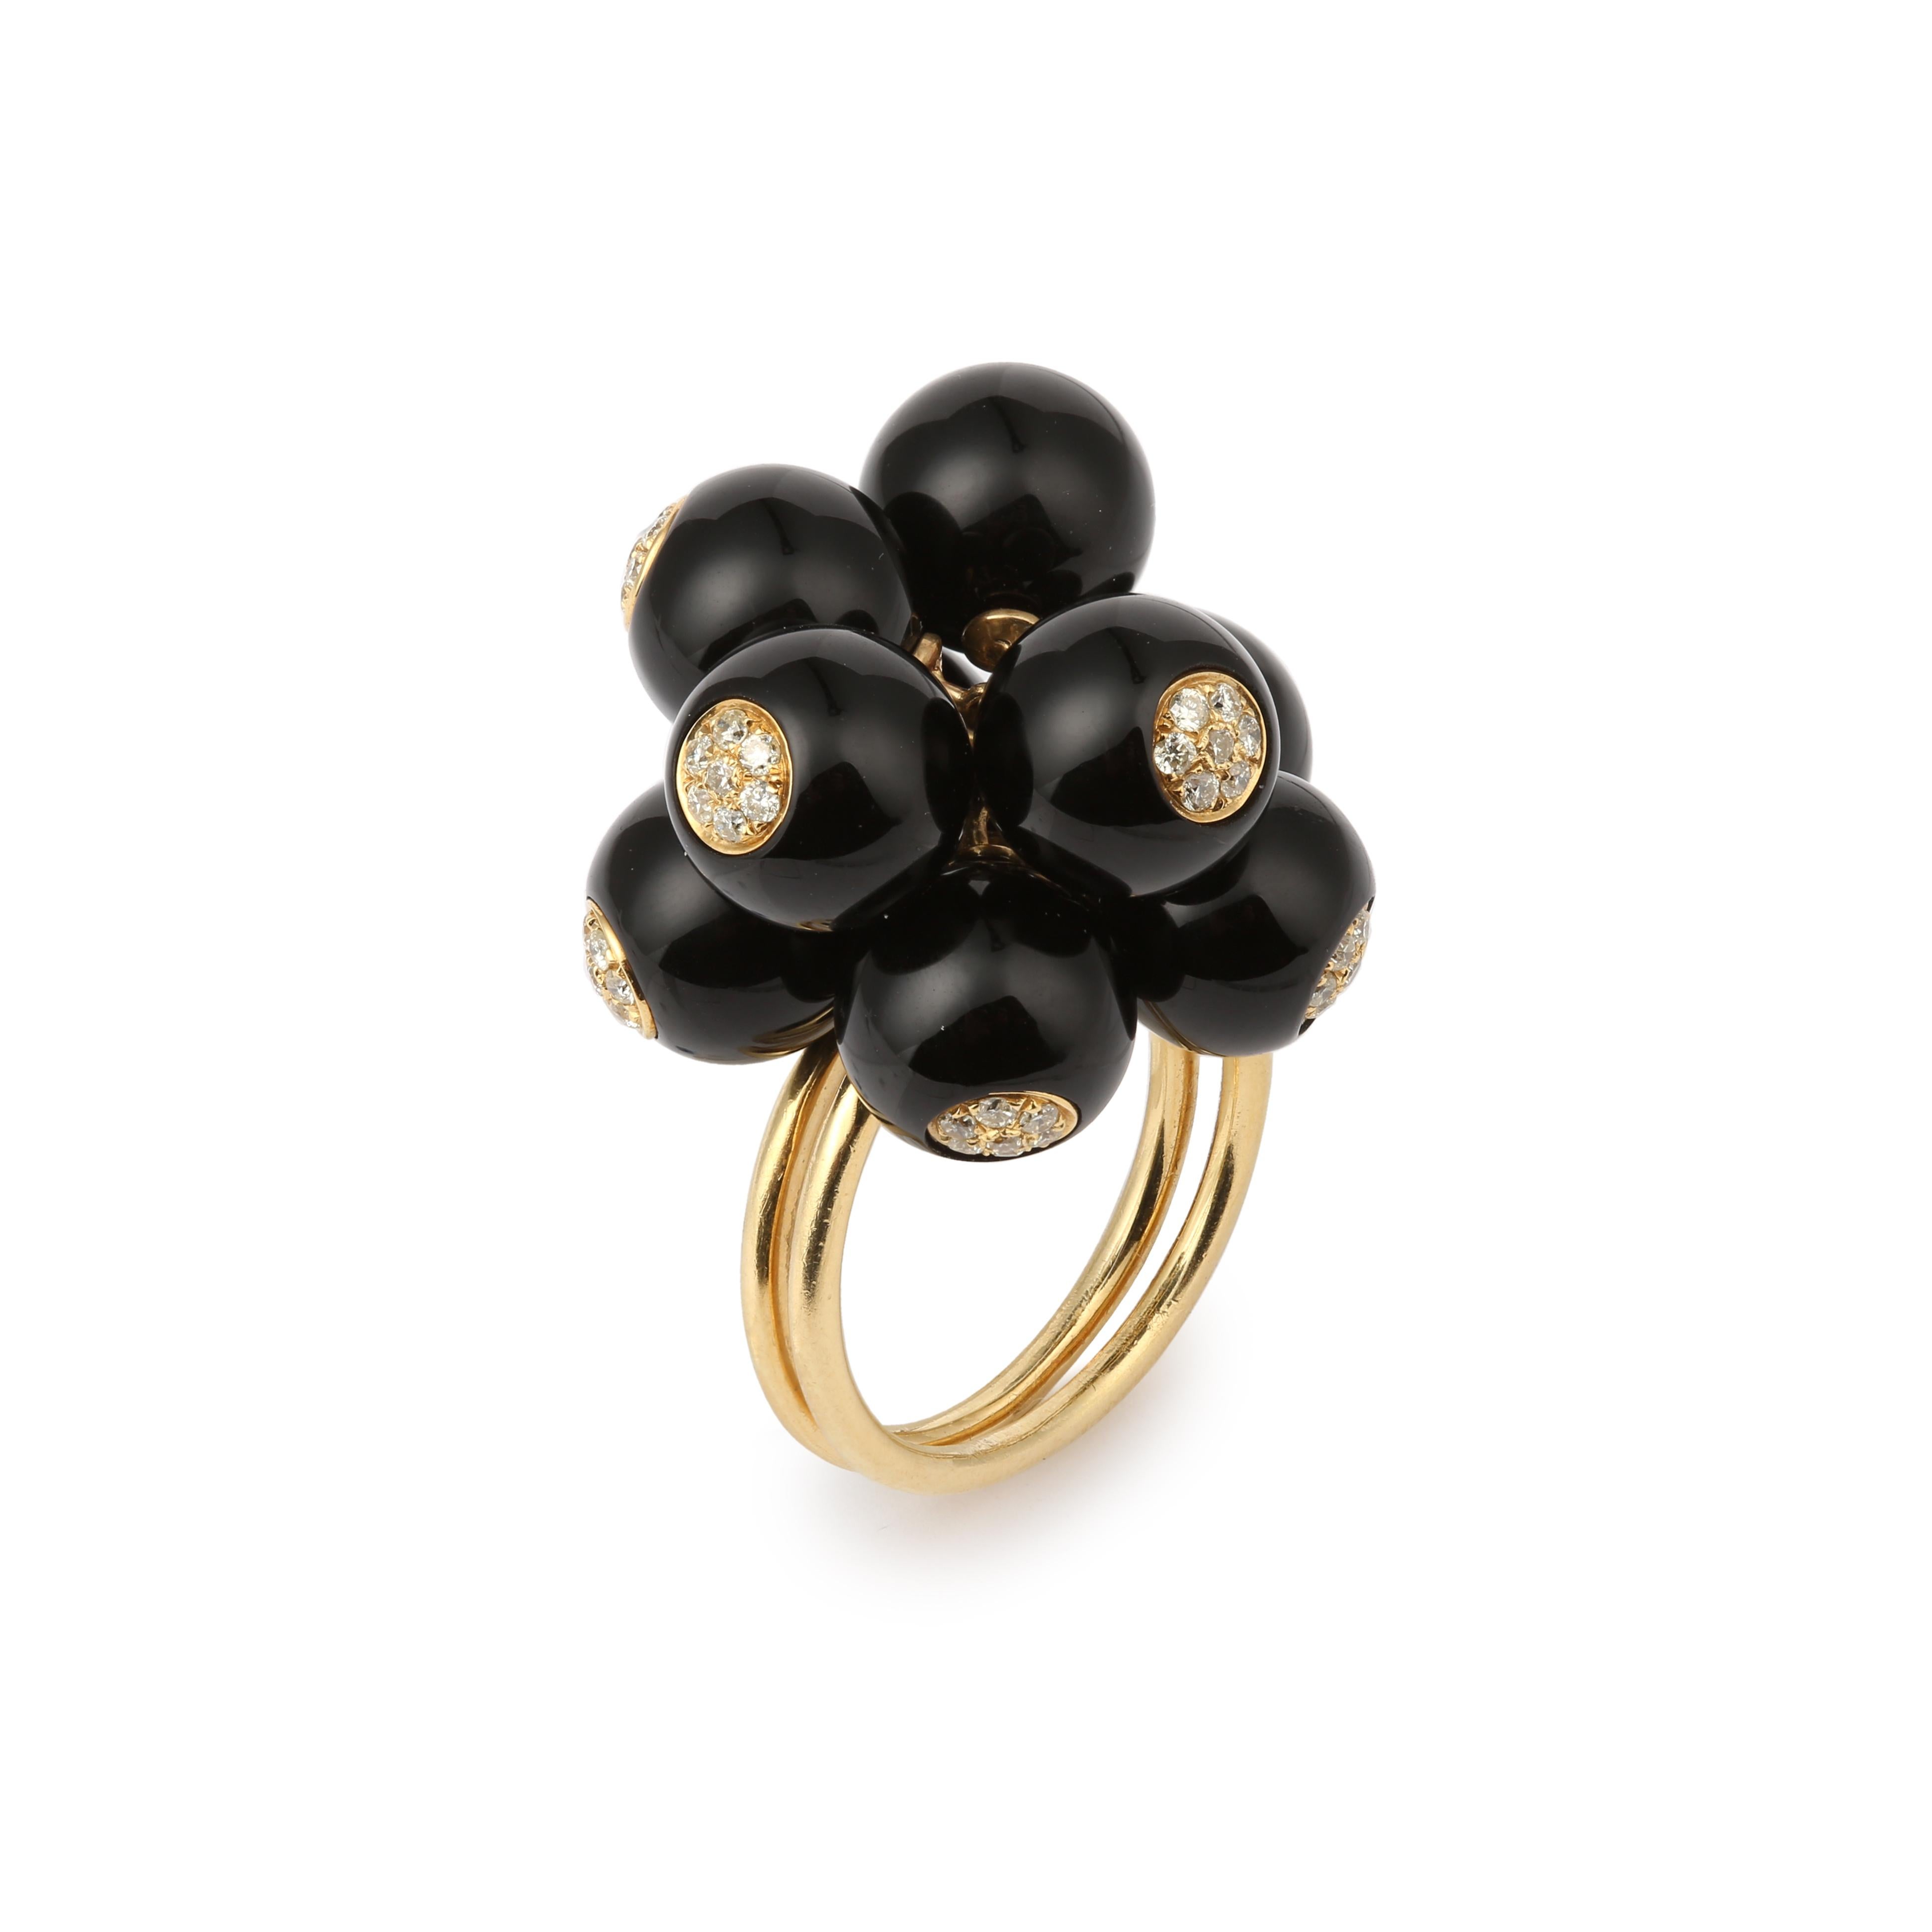 Yellow gold ring set with 9 onyx bells. Each articulated bell moves on the finger and is paved with 7 diamonds.

Total estimated diamond weight: 0.60 carats

Dimensions : 24 x 25.40 x 20.21 mm (0.945 x 1 x 0.795 inch)

Finger size : 56 (US : 7